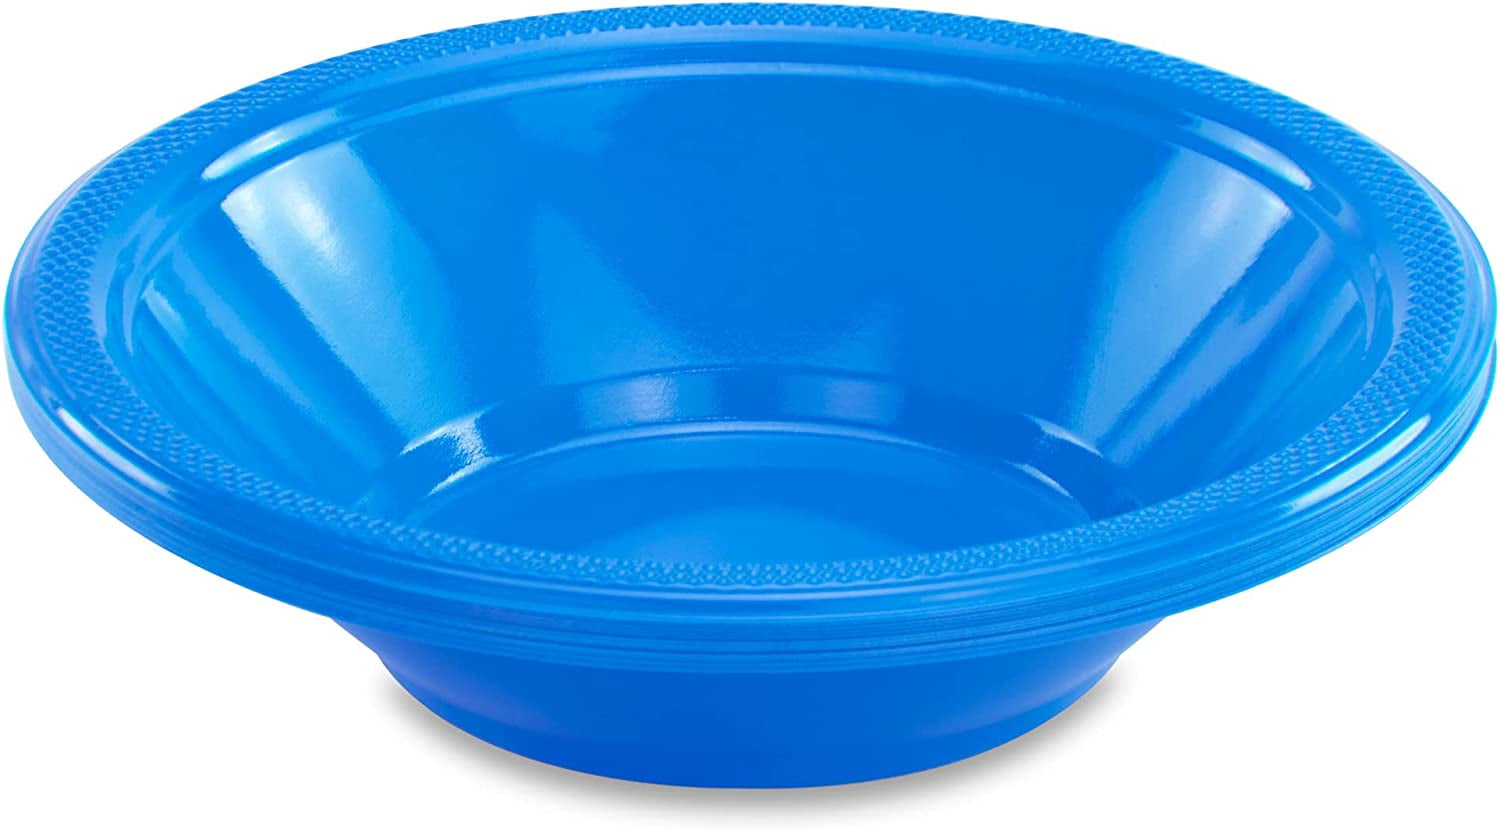 DecorRack Serving Bowl with Lid, Extra Large BPA Free Plastic Bowl